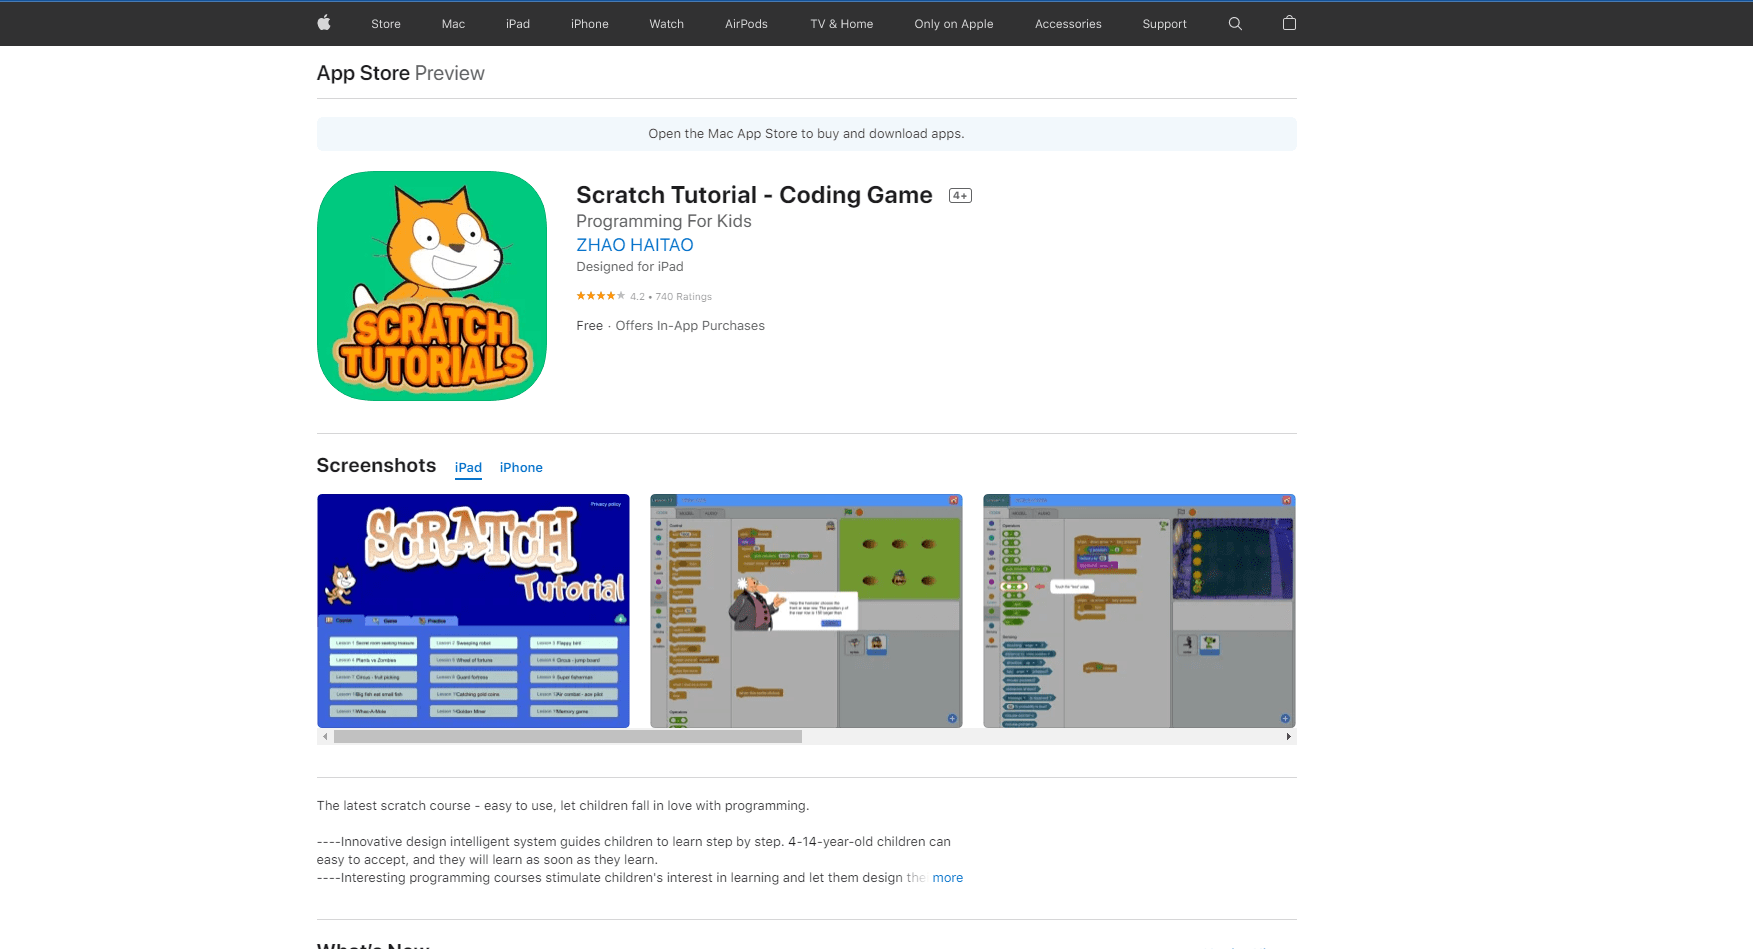 Scratch Tutorial - Coding Game on the App Store